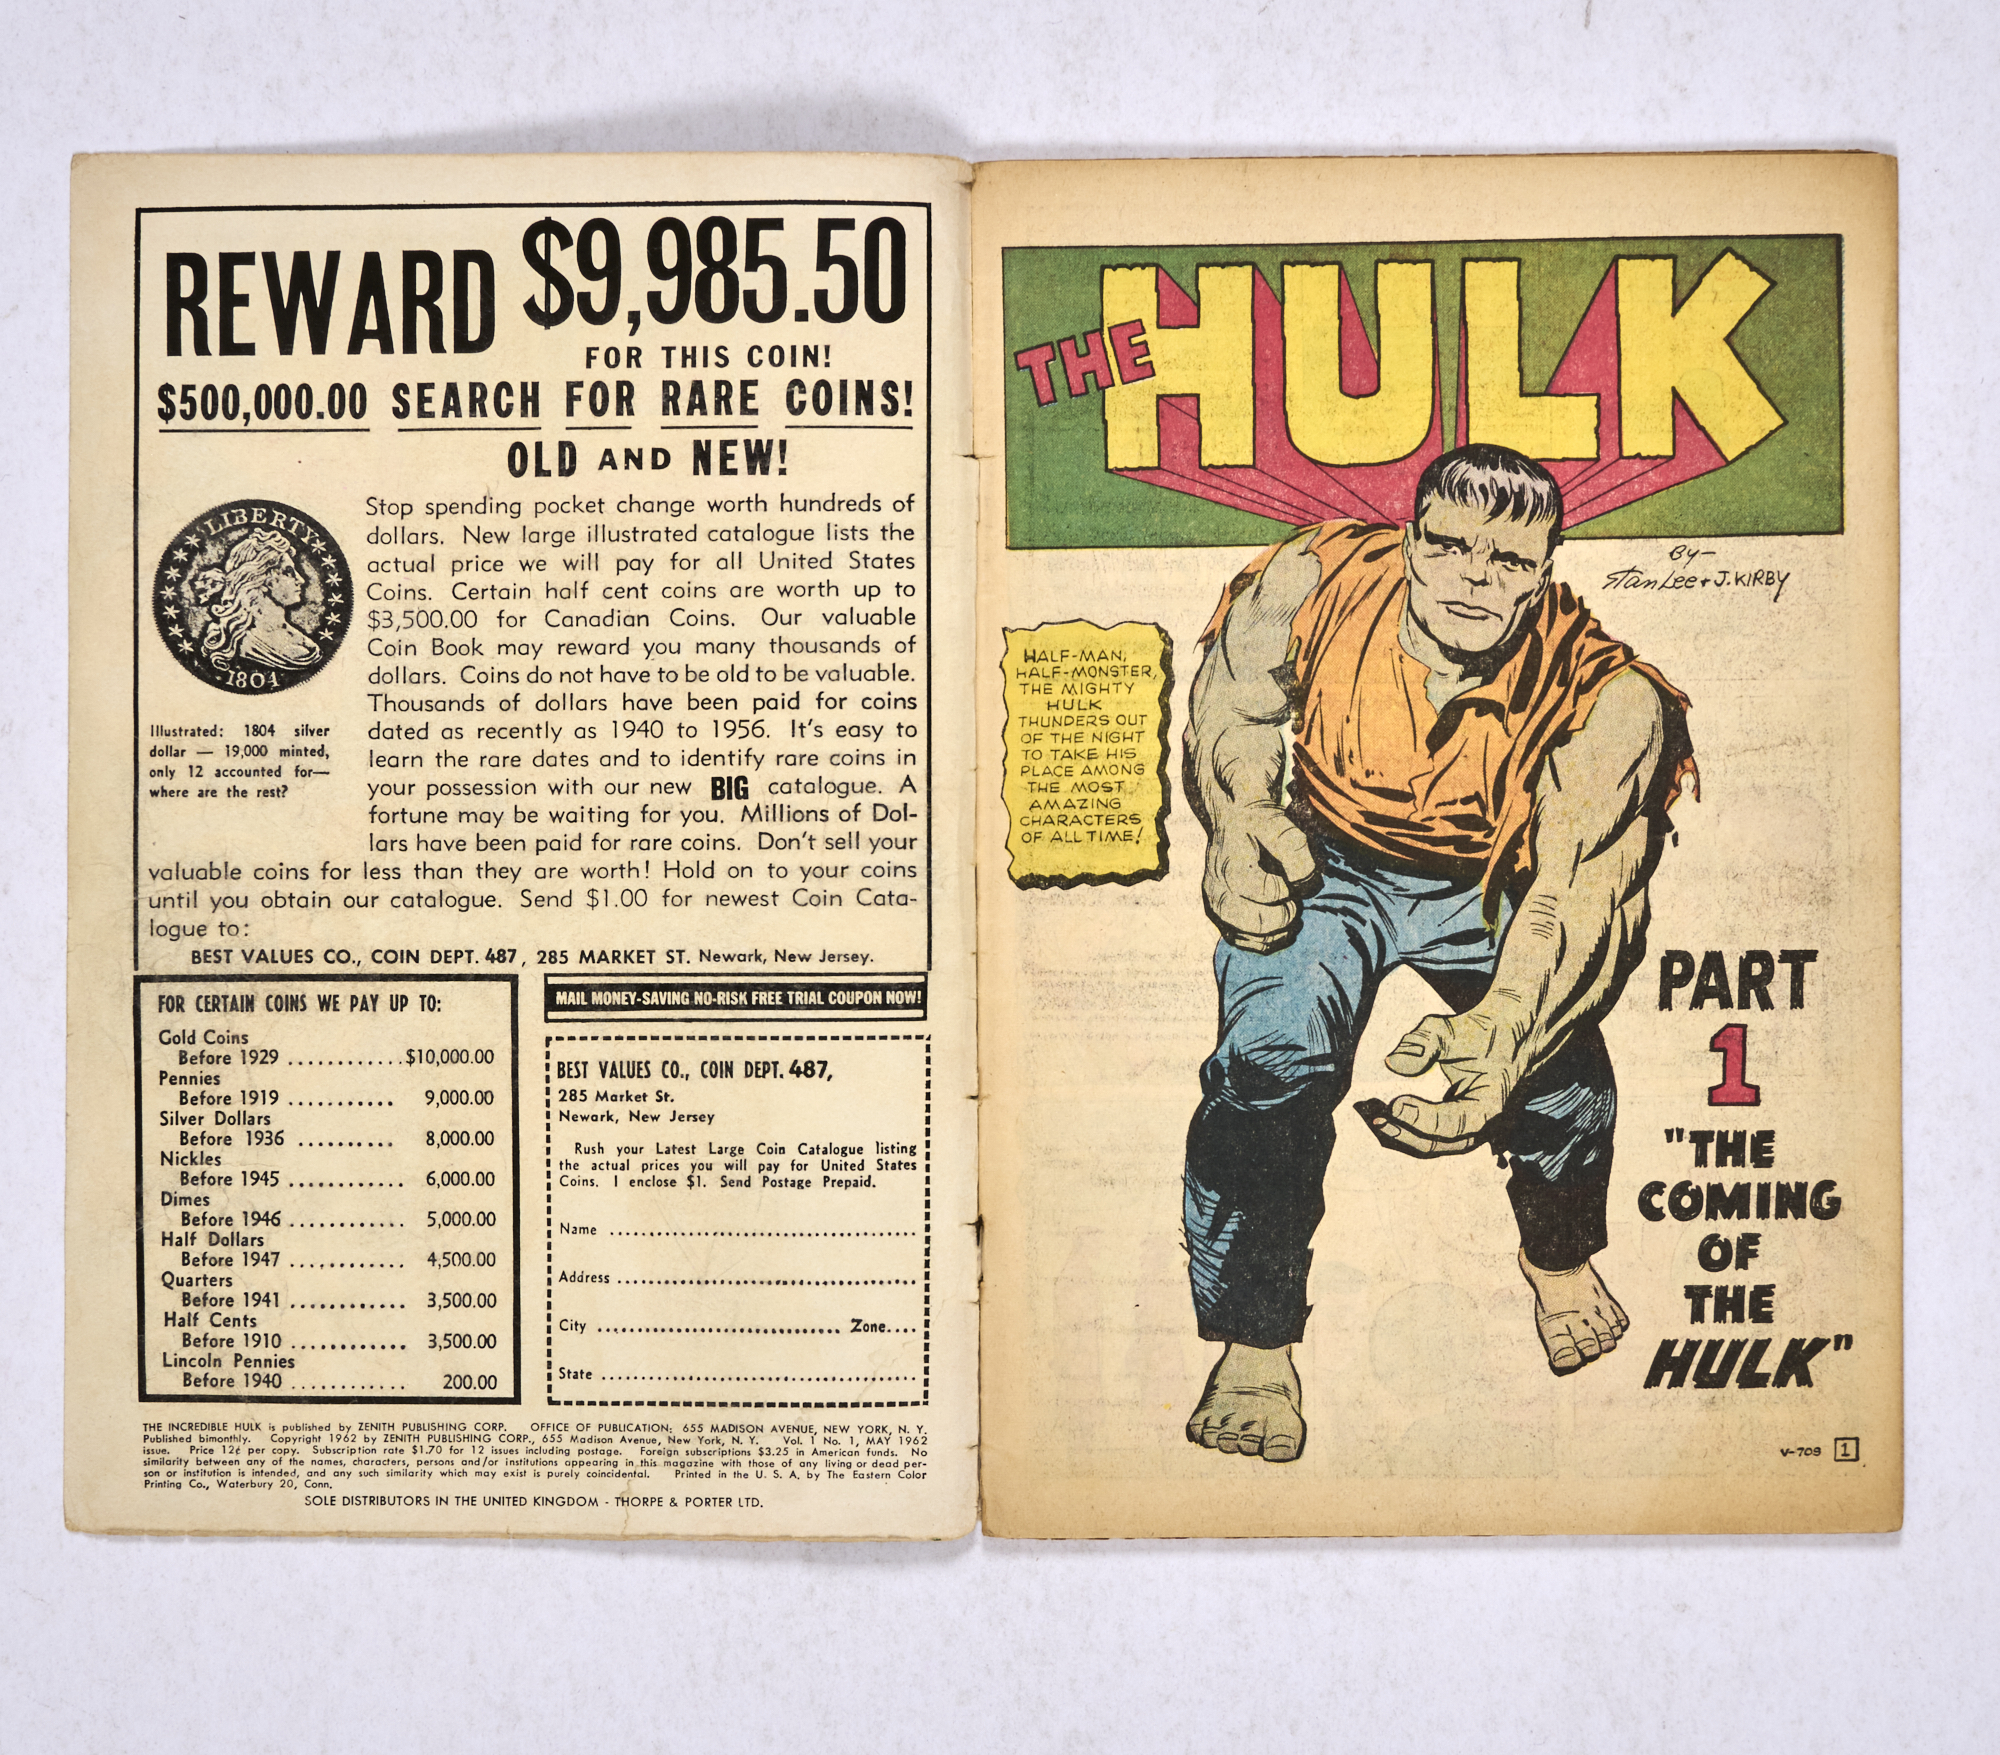 Incredible Hulk 1 (1962) General overall wear and lower staple rust with no major defects. Retrieved - Image 3 of 8